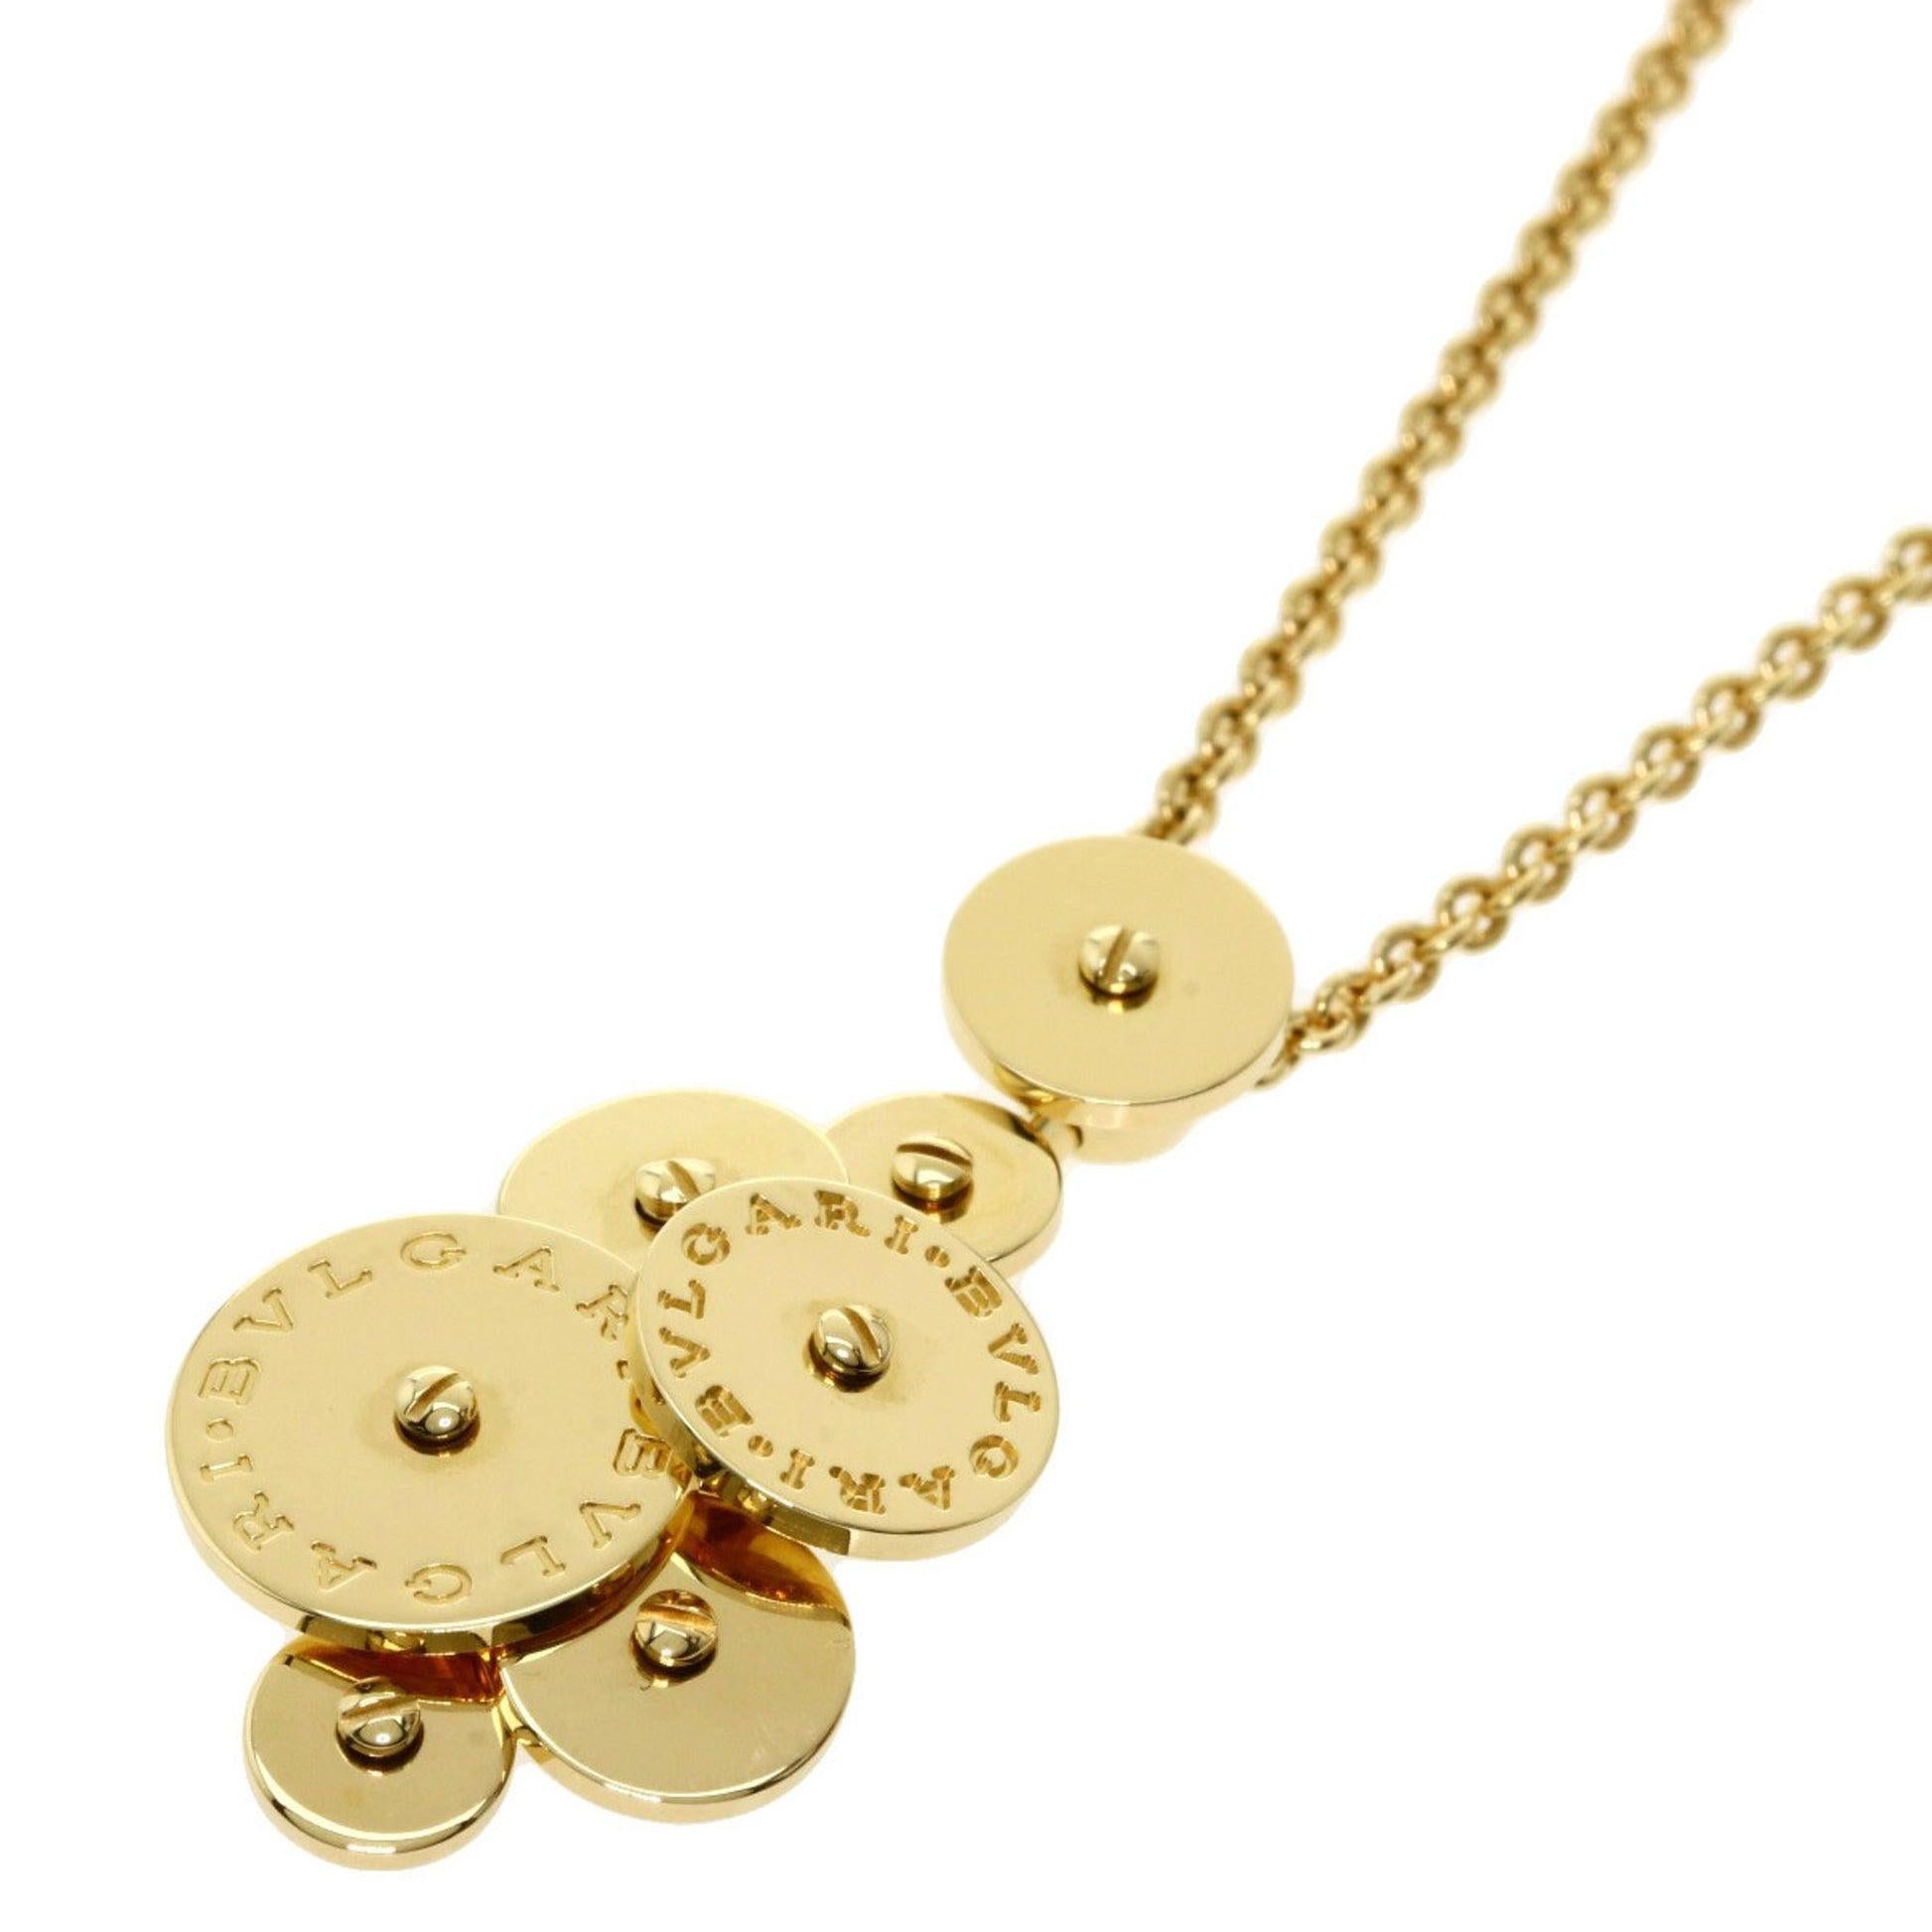 Bvlgari Chicladi 7 Disc Necklace in 18K Yellow Gold

Additional Information:
Brand: Bvlgari
Gender: Women
Material: Yellow gold (18K)
Condition: Good
Condition details: The item has been used and has some minor flaws. Before purchasing, please refer